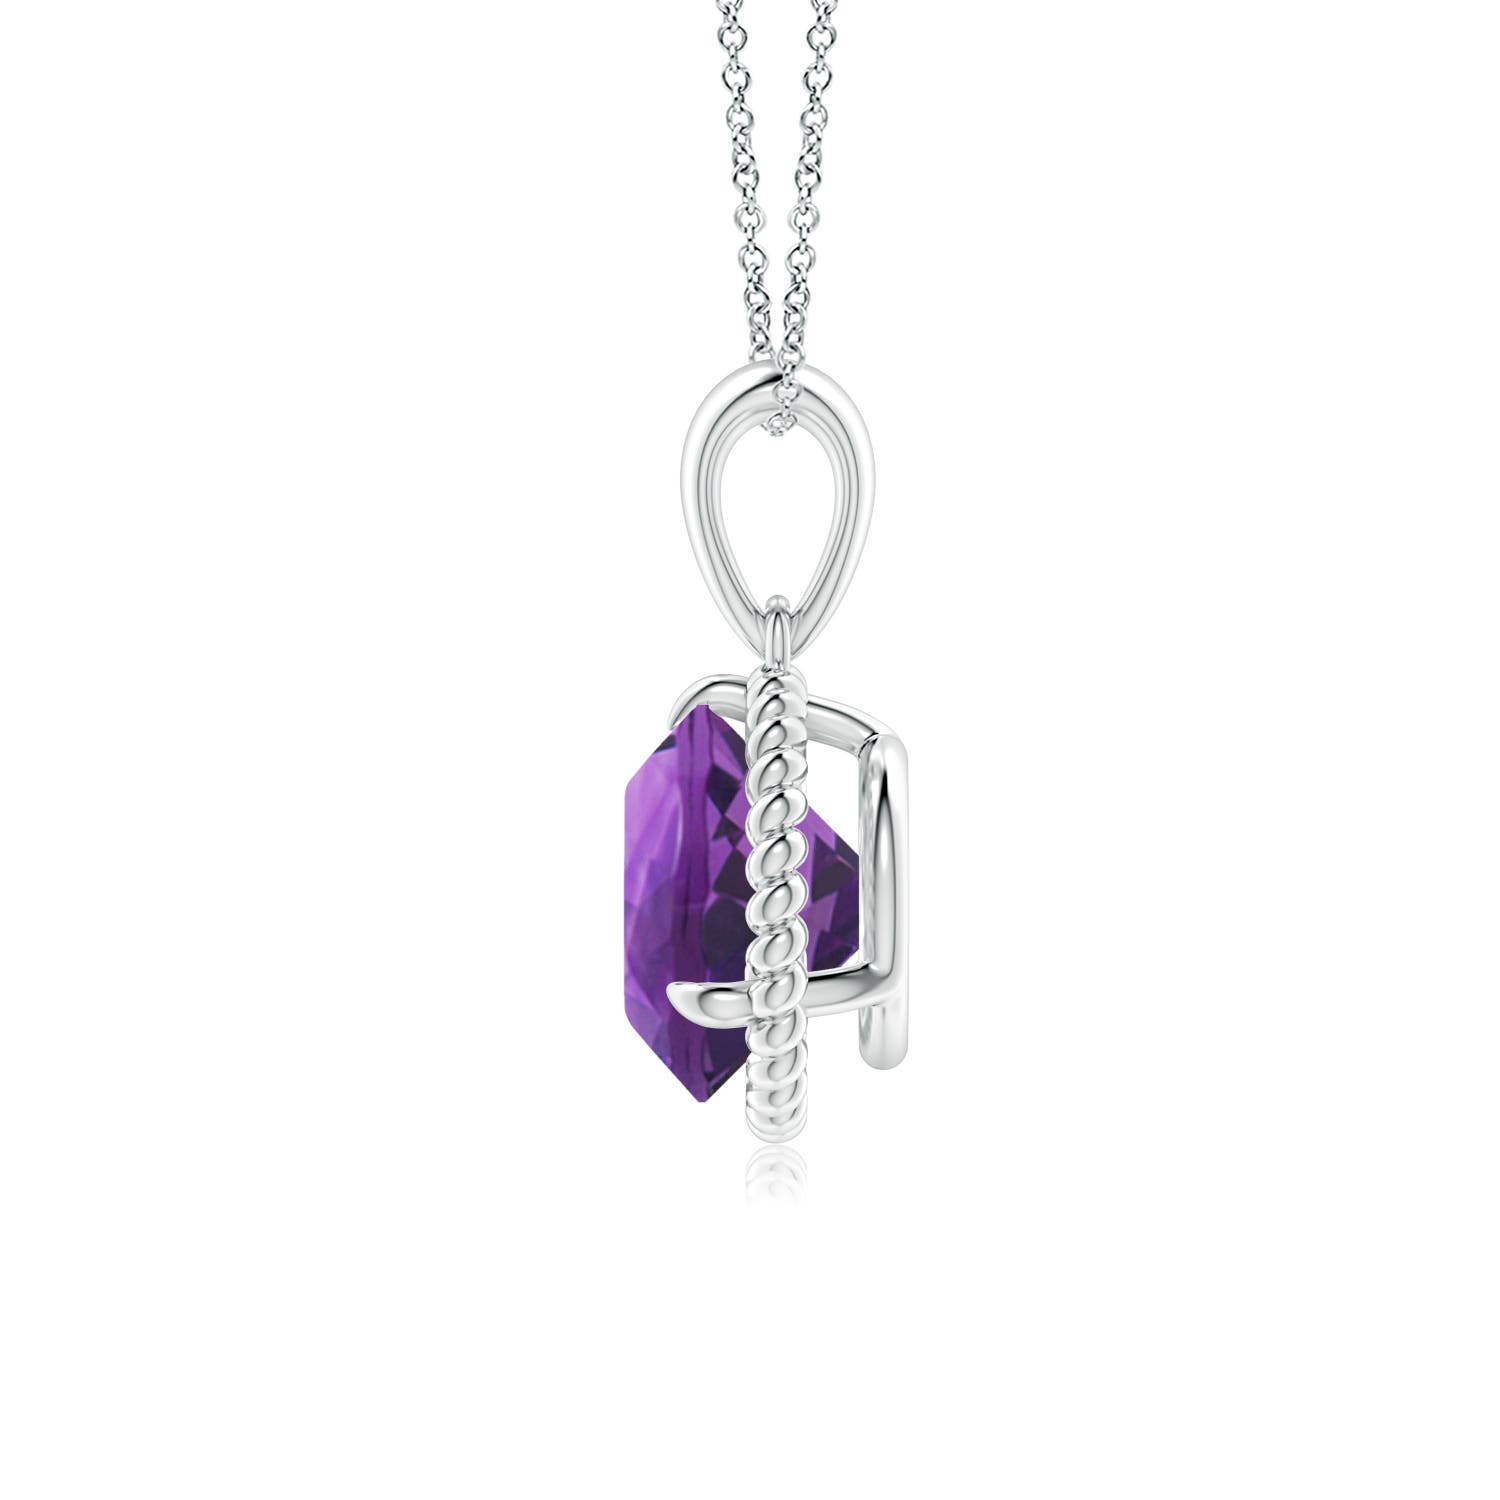 AAA - Amethyst / 1.7 CT / 14 KT White Gold